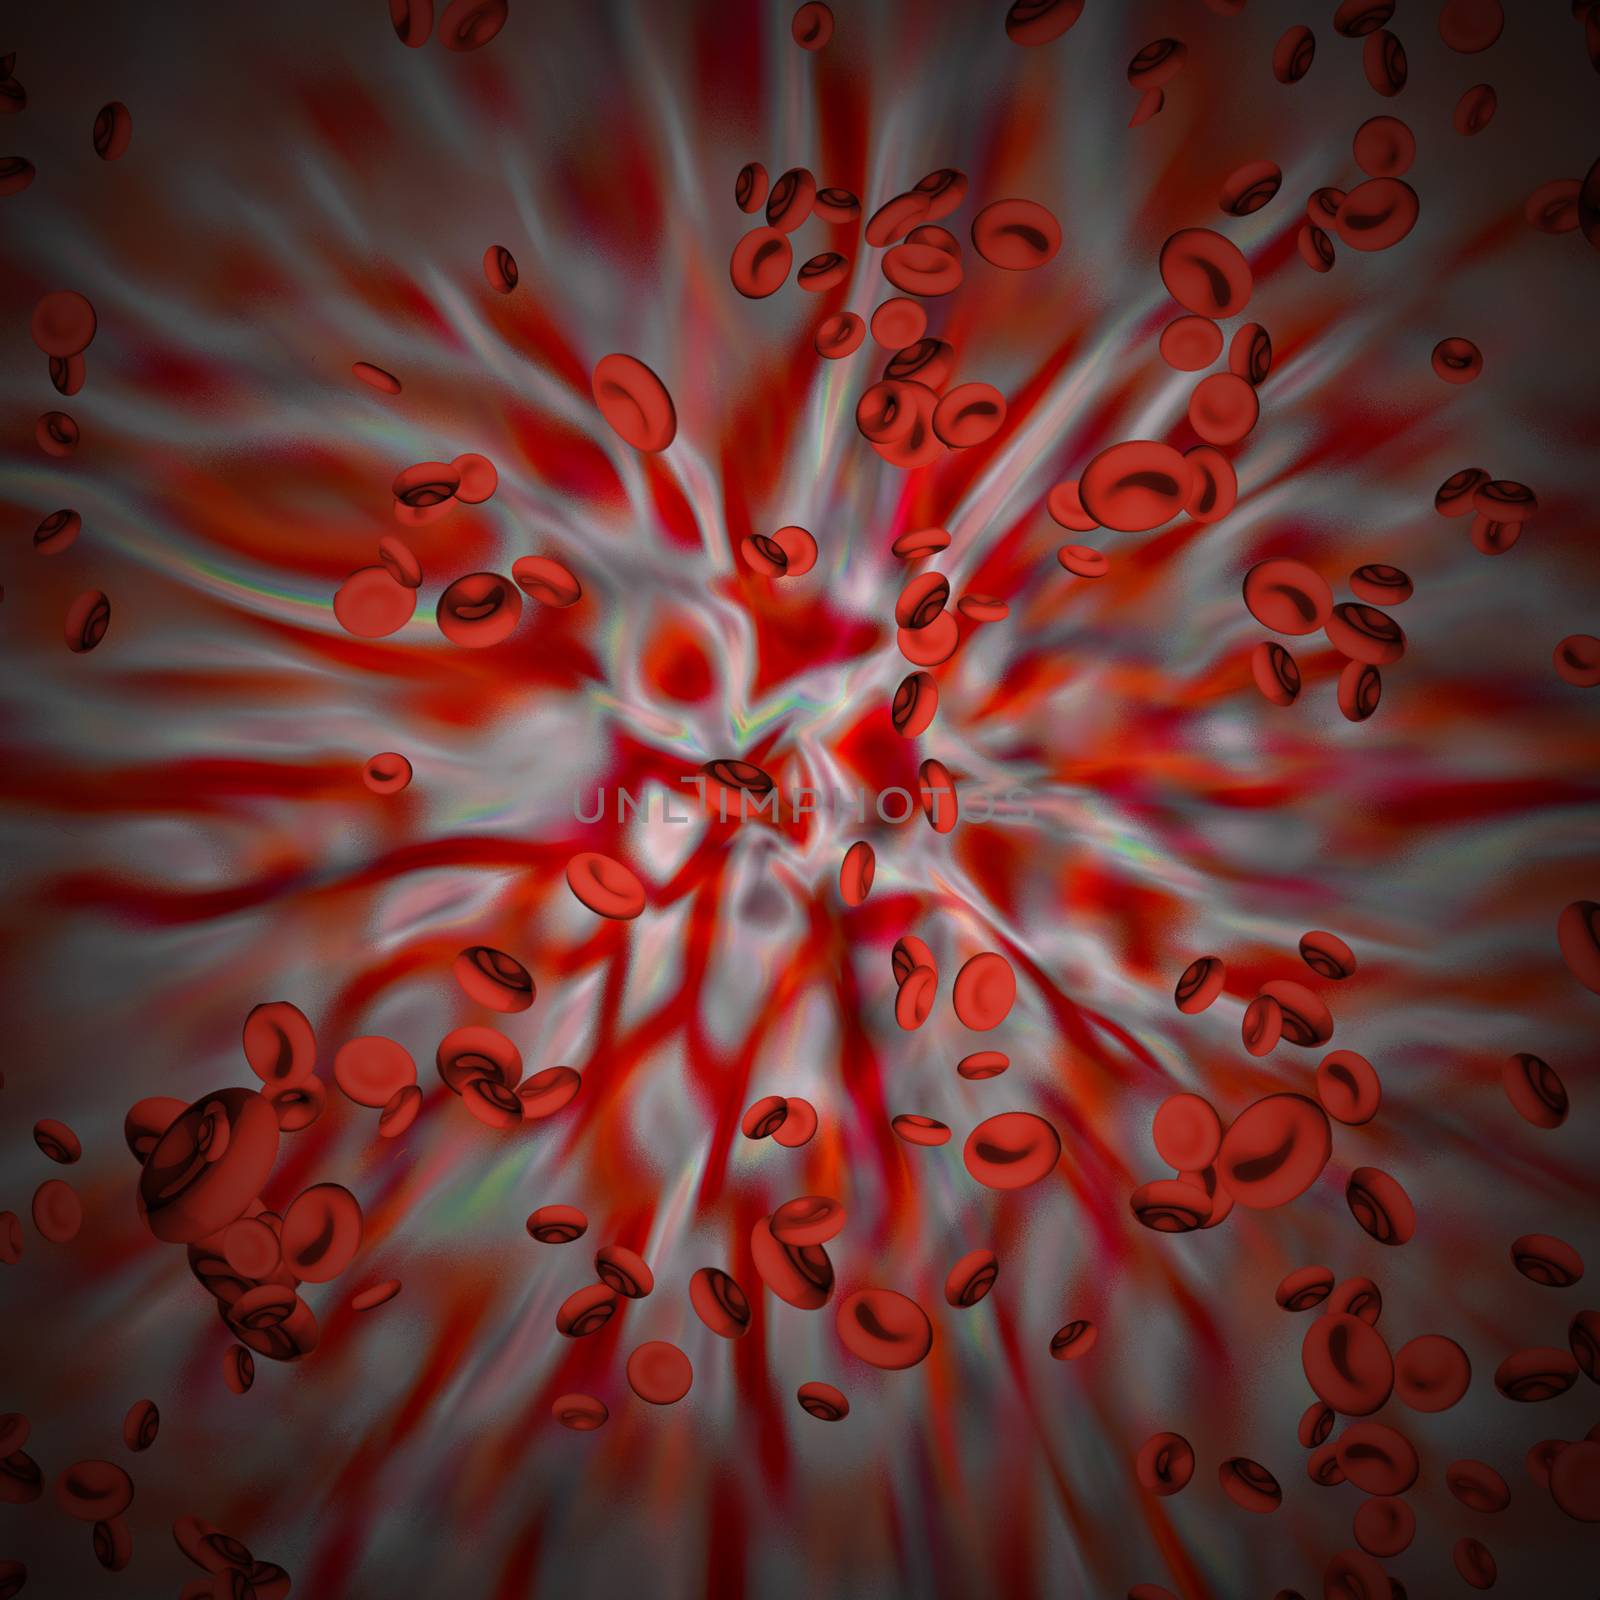 Red Blood cells by applesstock